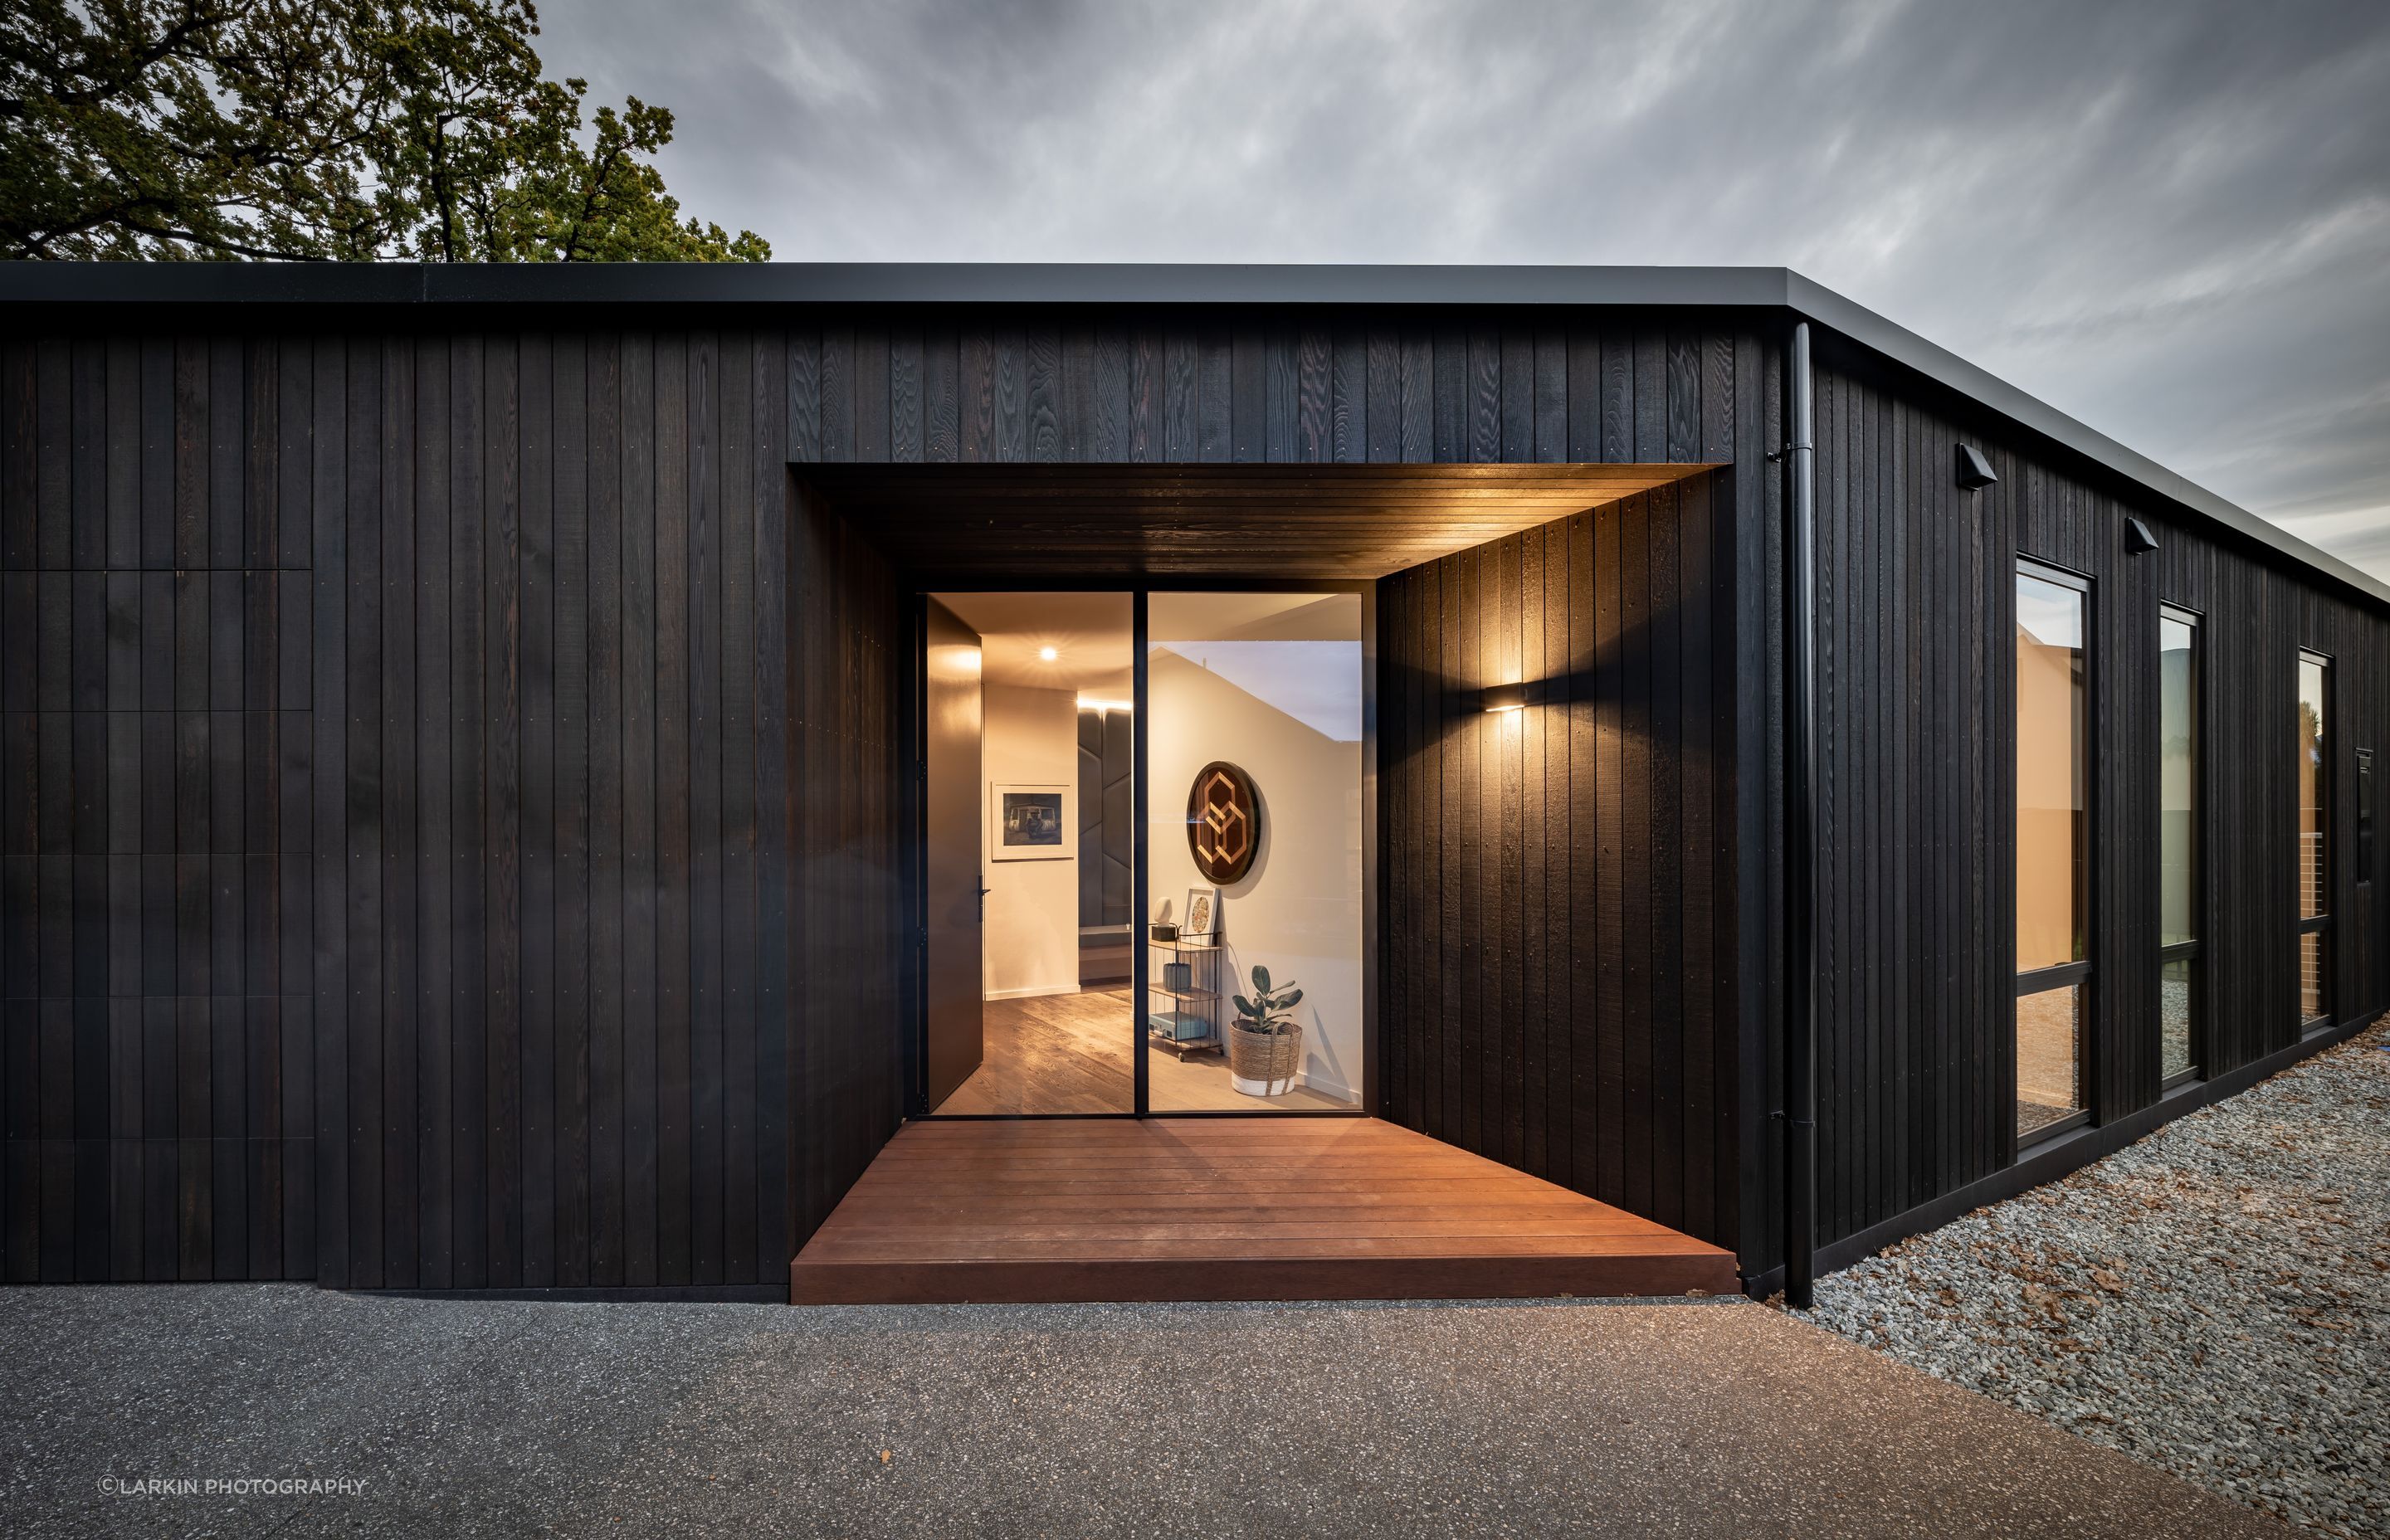 “I tend to play a bit with scale. Those entry doors are 2.7 metres tall so although it looks small and compact, when you get there it's quite a big dwelling.” The cedar cladding is by Rosenfeld Kidson.